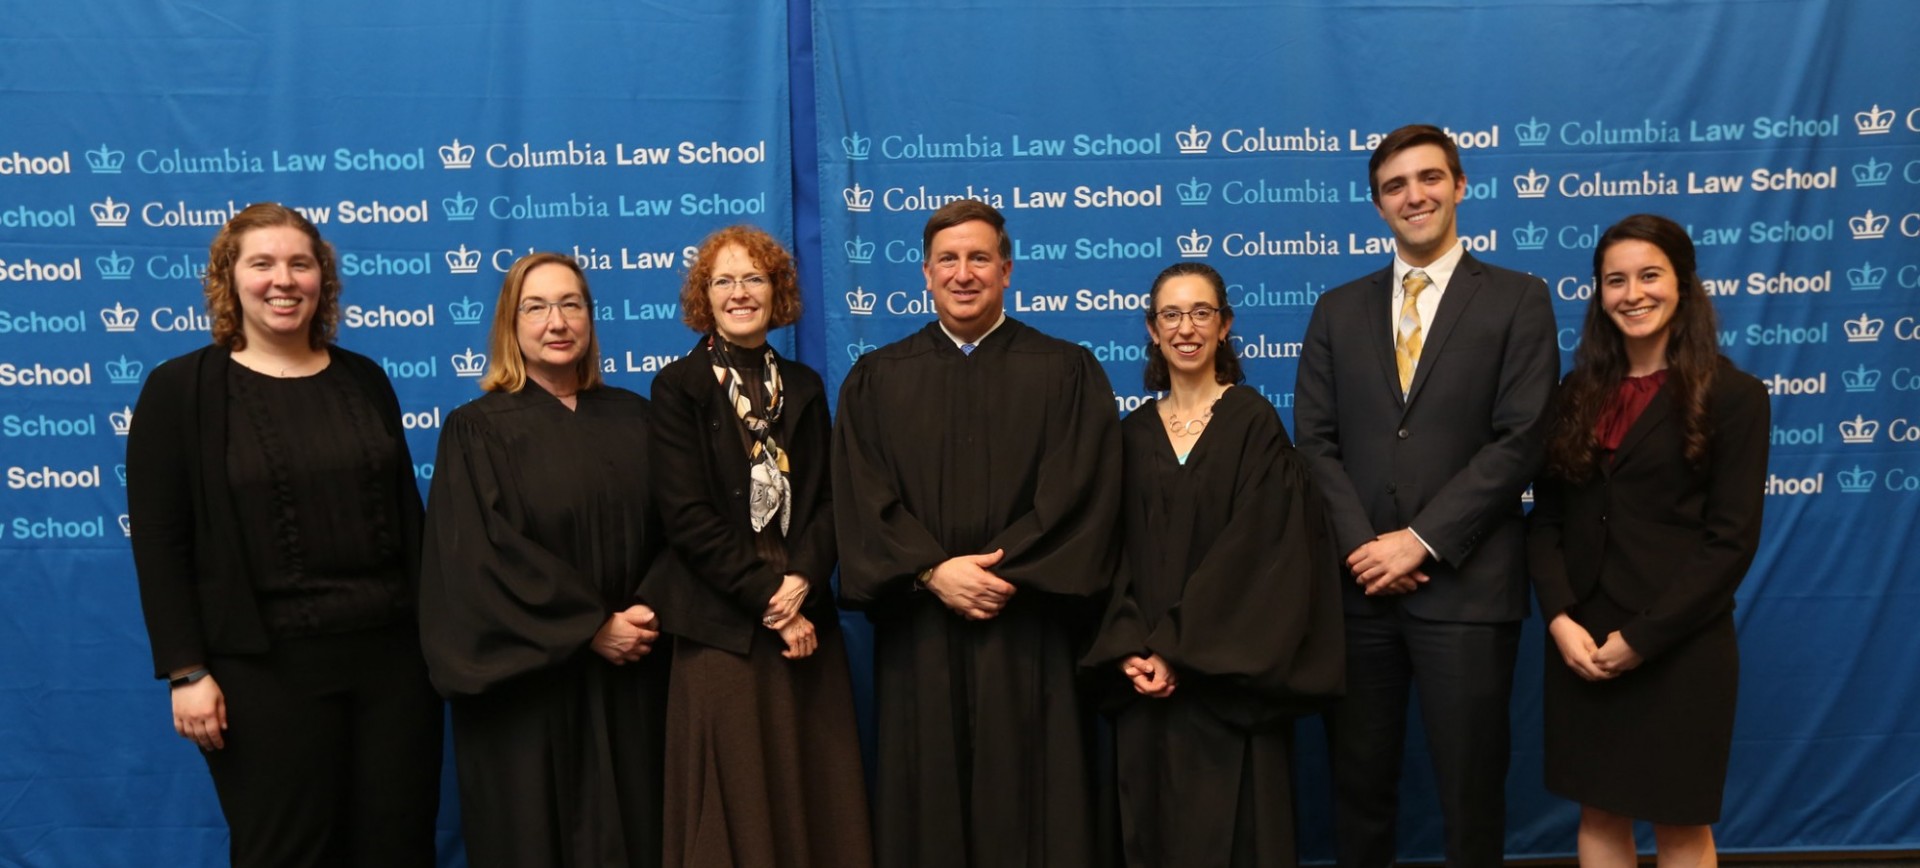 Photo of Dean Gillian Lester with the judges from the 2018 Harlan Fiske Stone Moot Court Final, the student bailiff, and the student directors who wrote the problem.